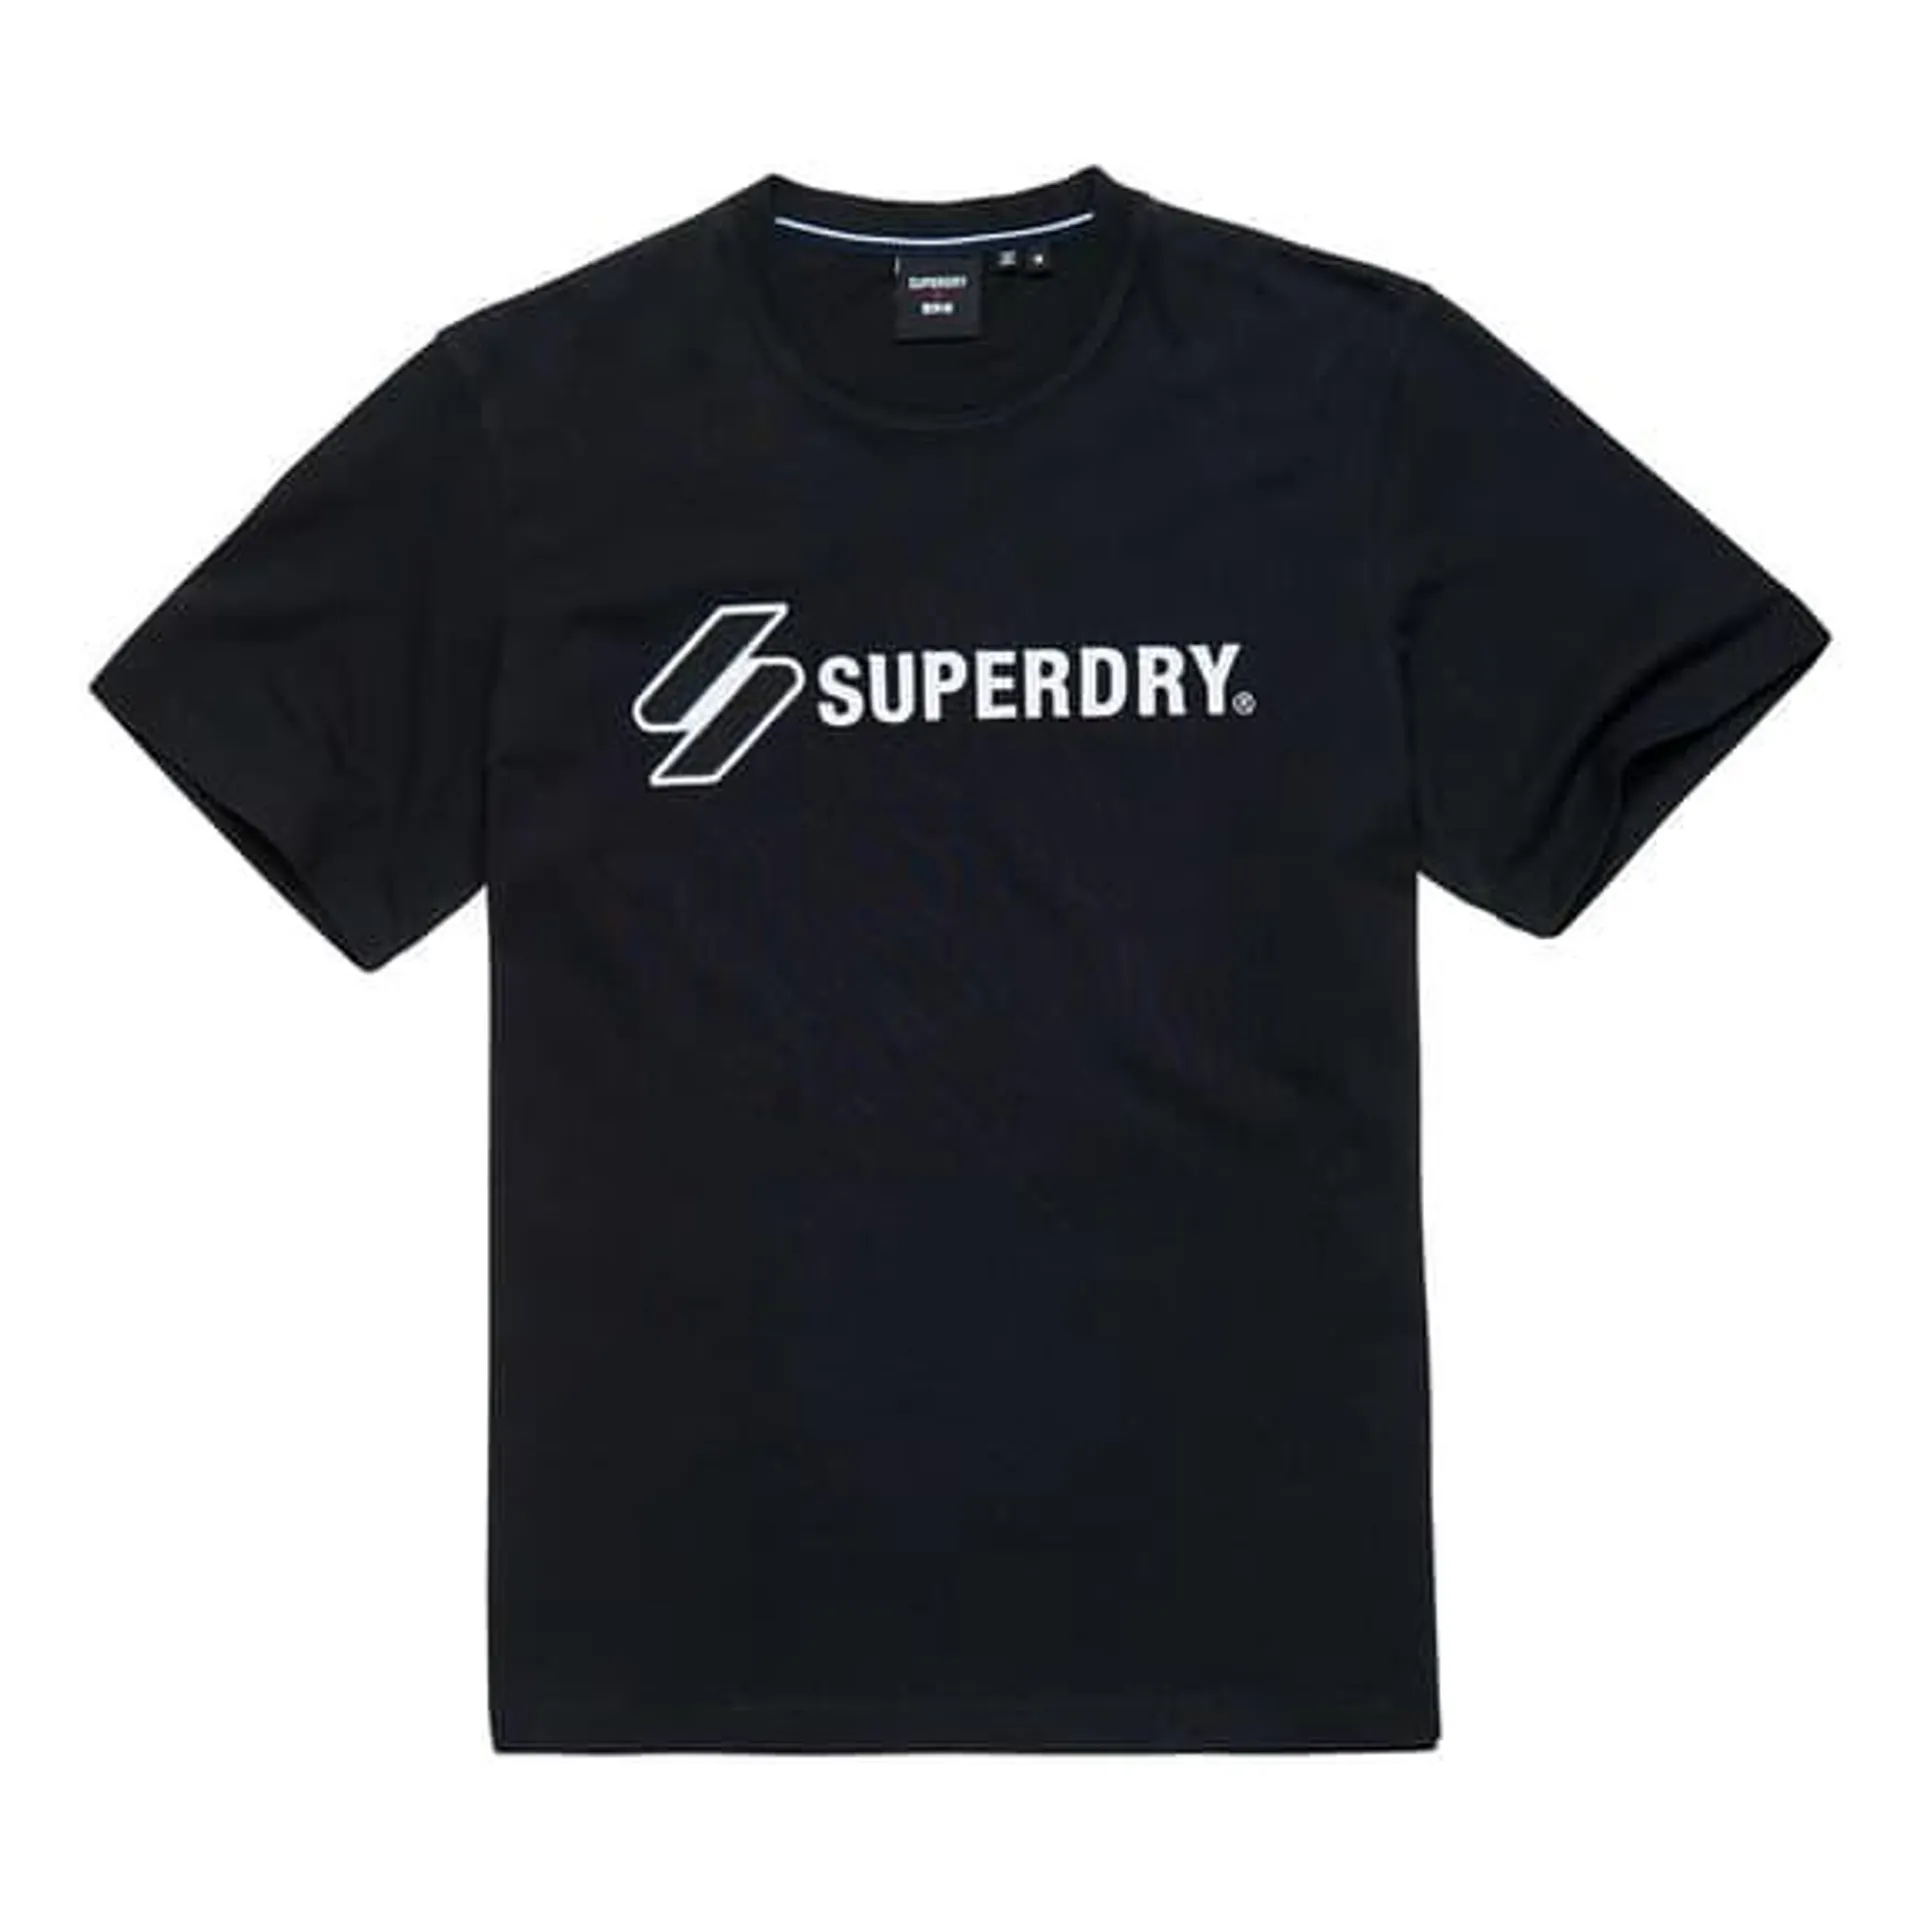 T-shirt Superdry Code Stacked manche courte noir blanc